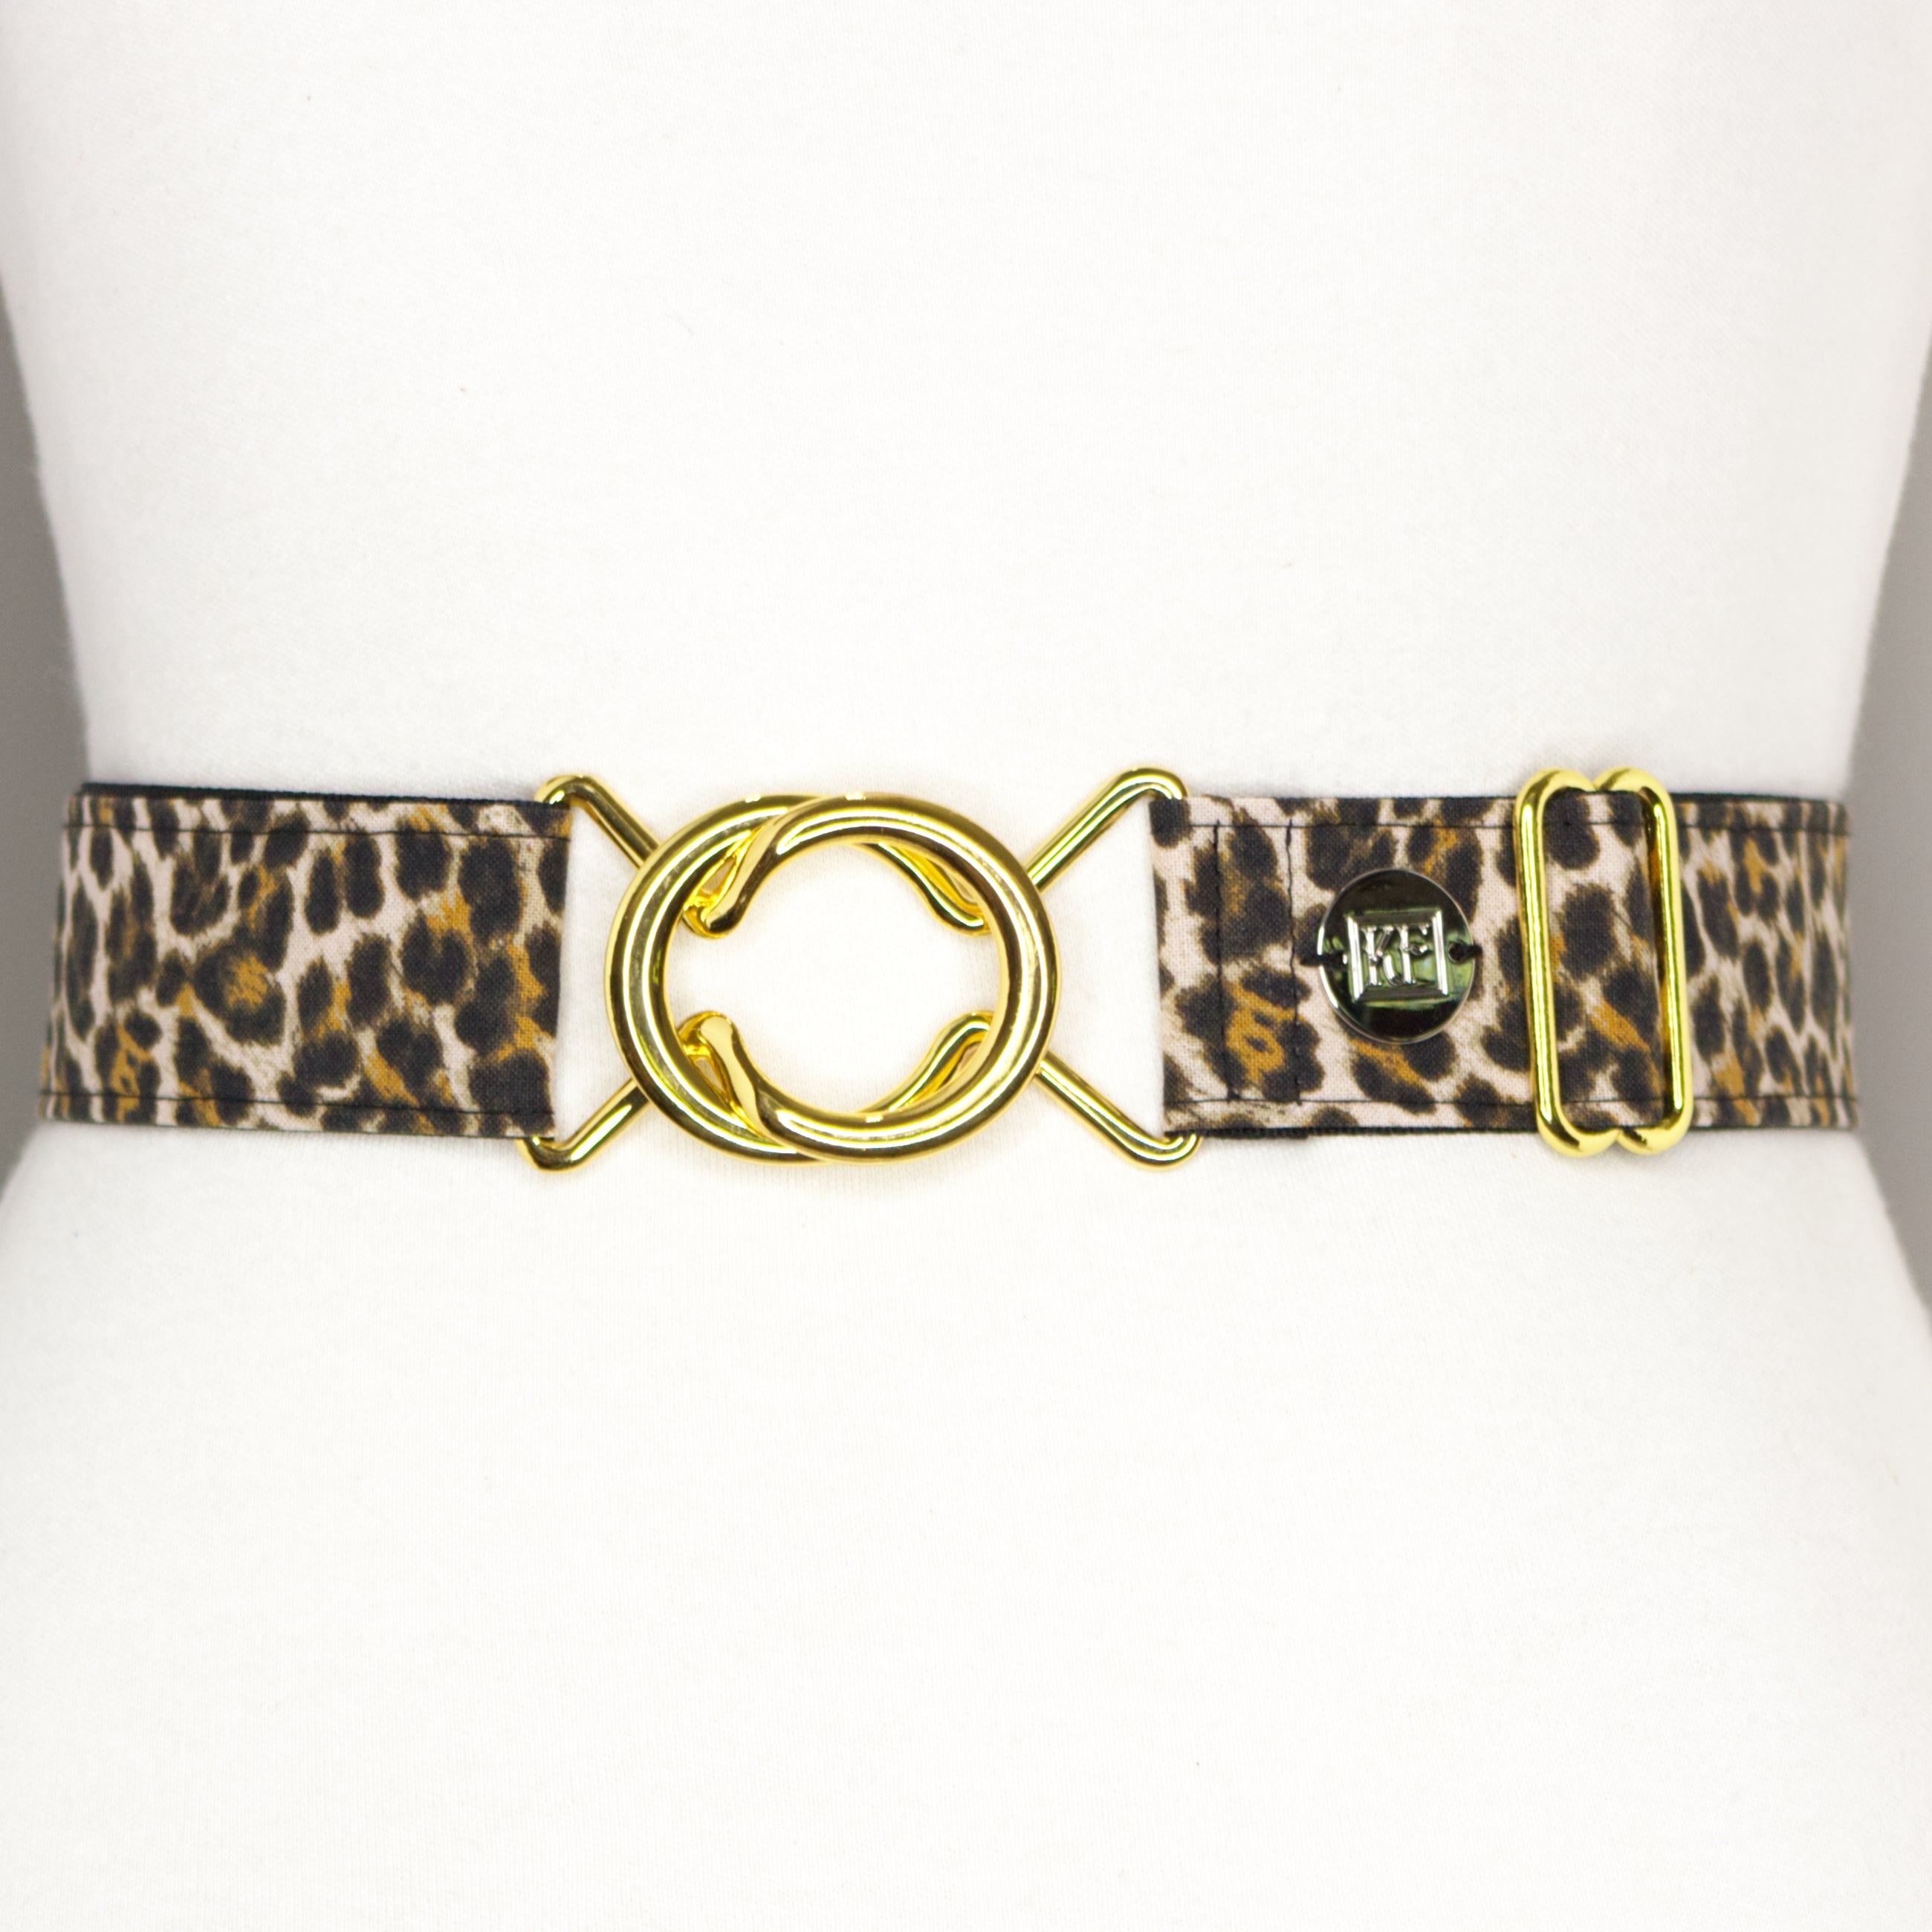 Cheetah belt with 1.5" bright gold interlocking clasp by KF Clothing